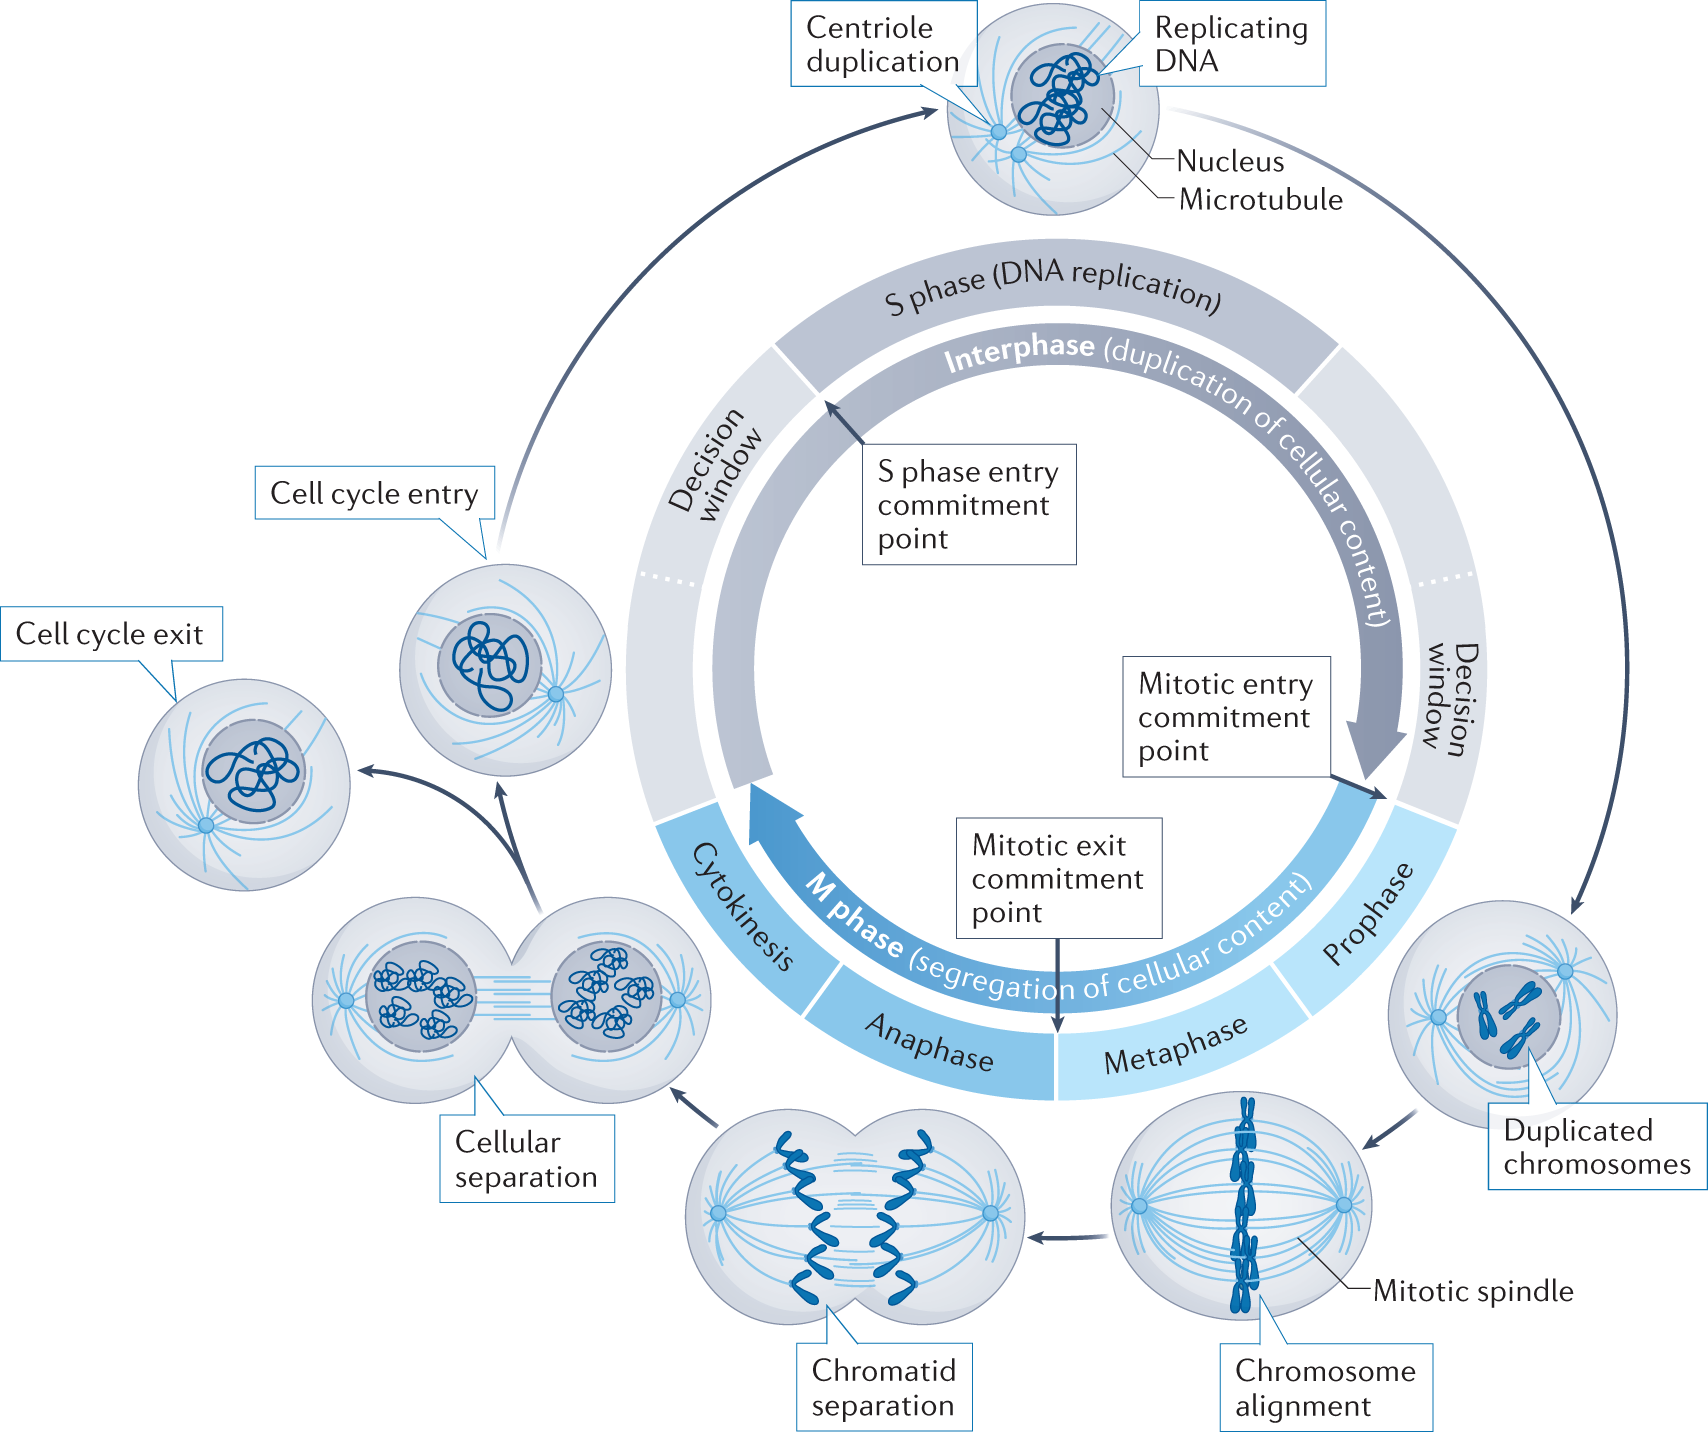 Cell cycle control in cancer | Nature Reviews Molecular Cell Biology